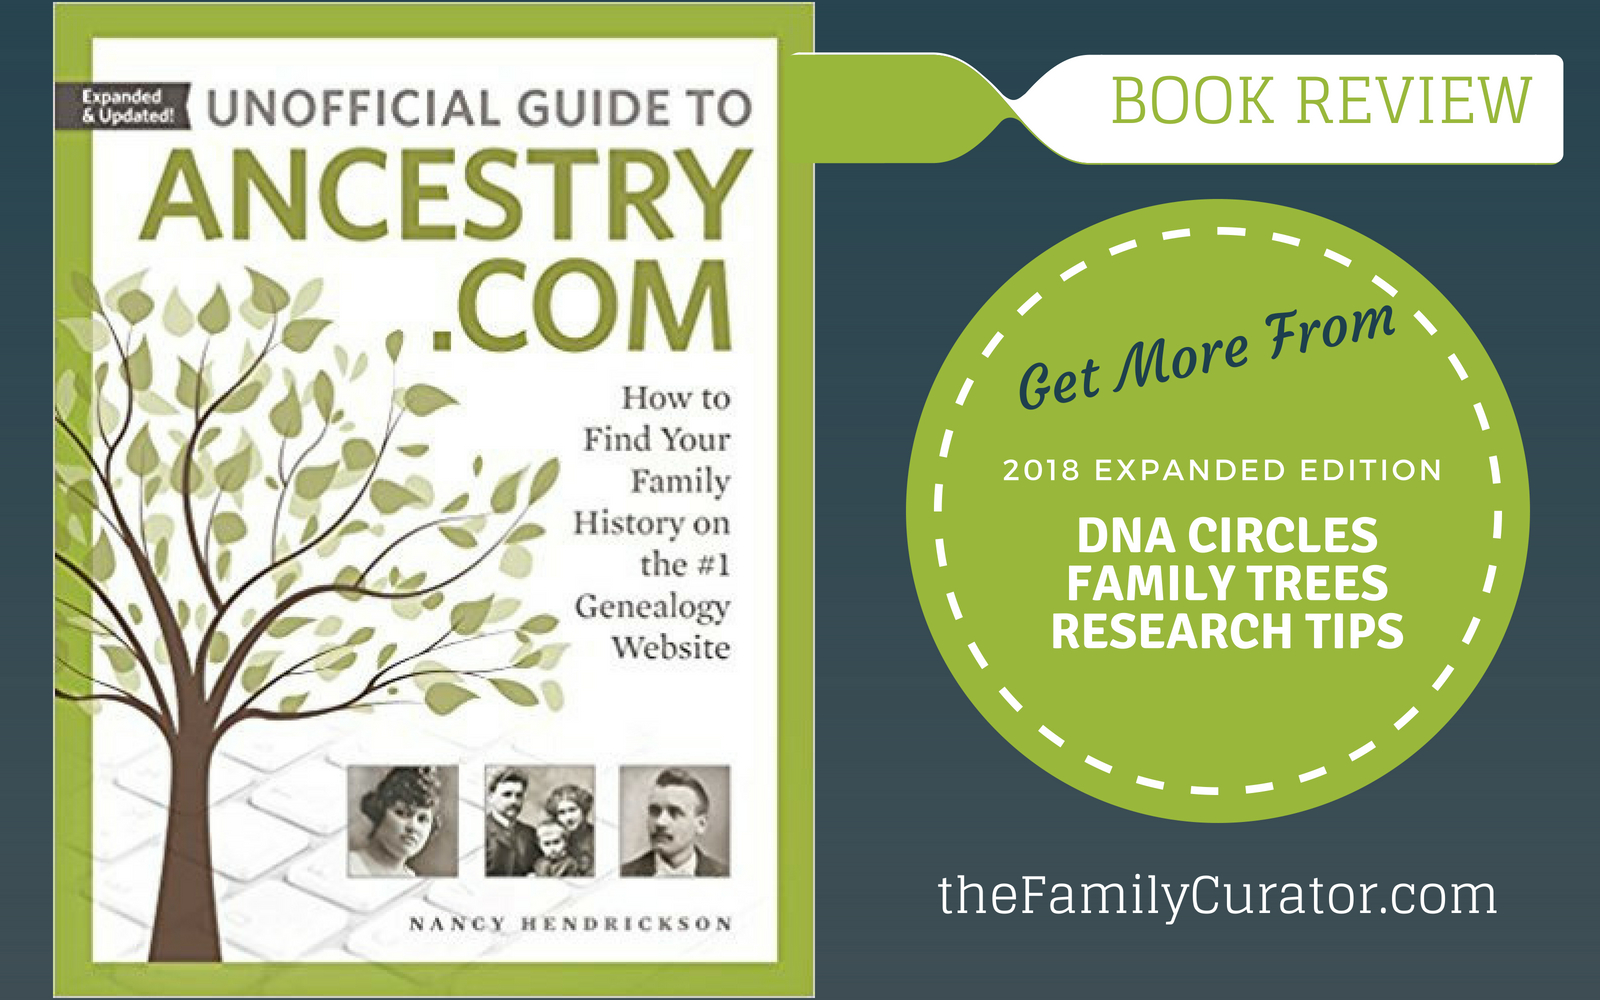 Book Review: Unofficial Guide to Ancestry.com including AncestryDNA - The  Family Curator